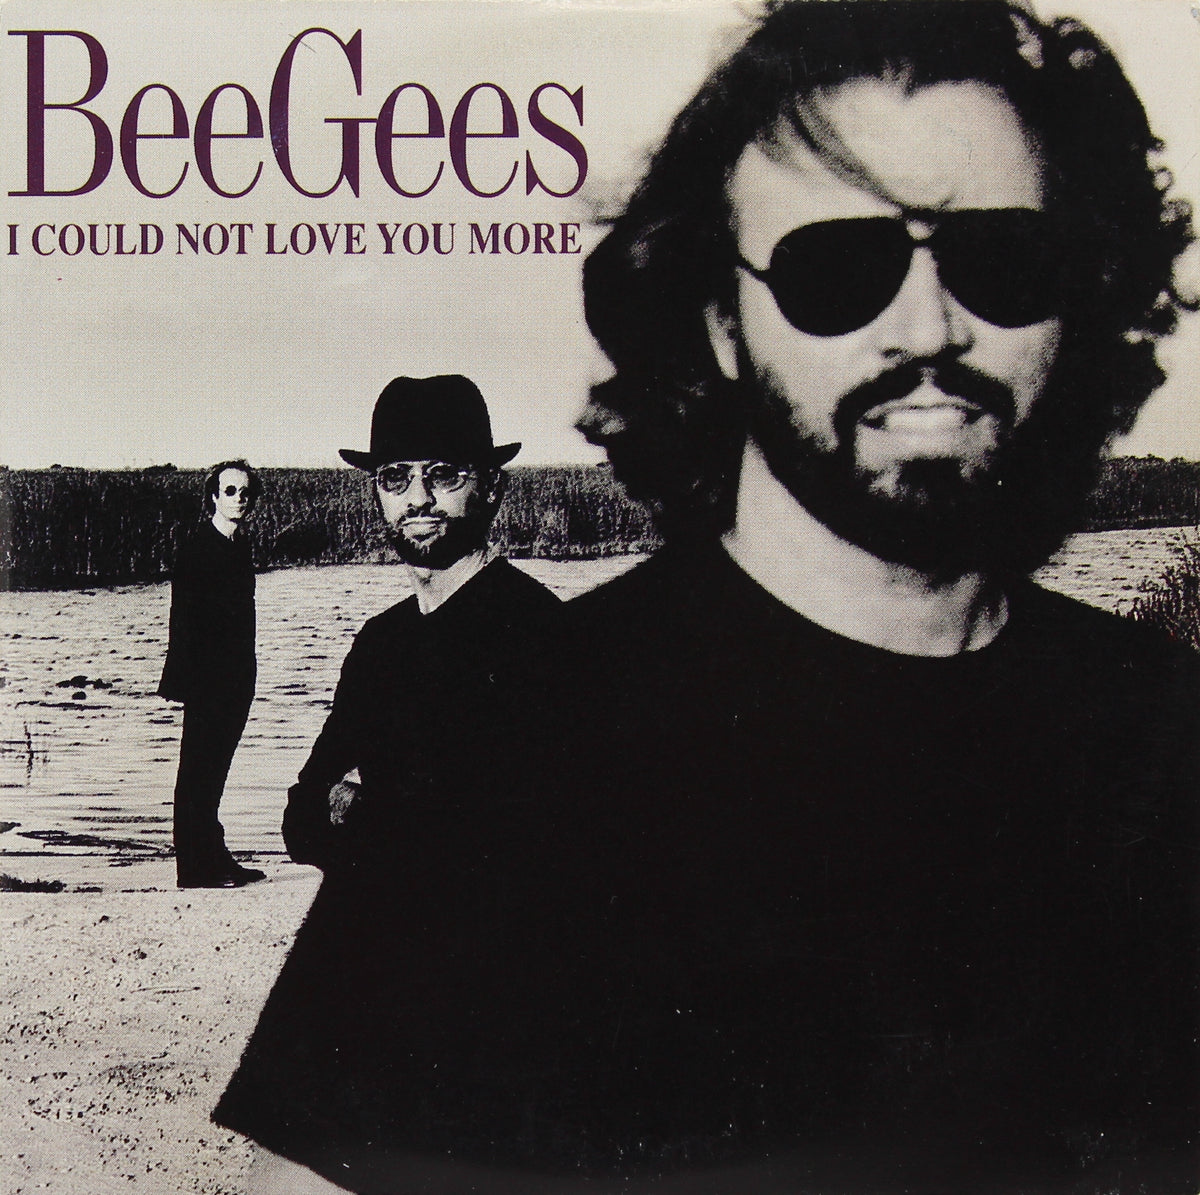 Bee Gees - I Could Not Love You More, CD Single Promo, Mexico